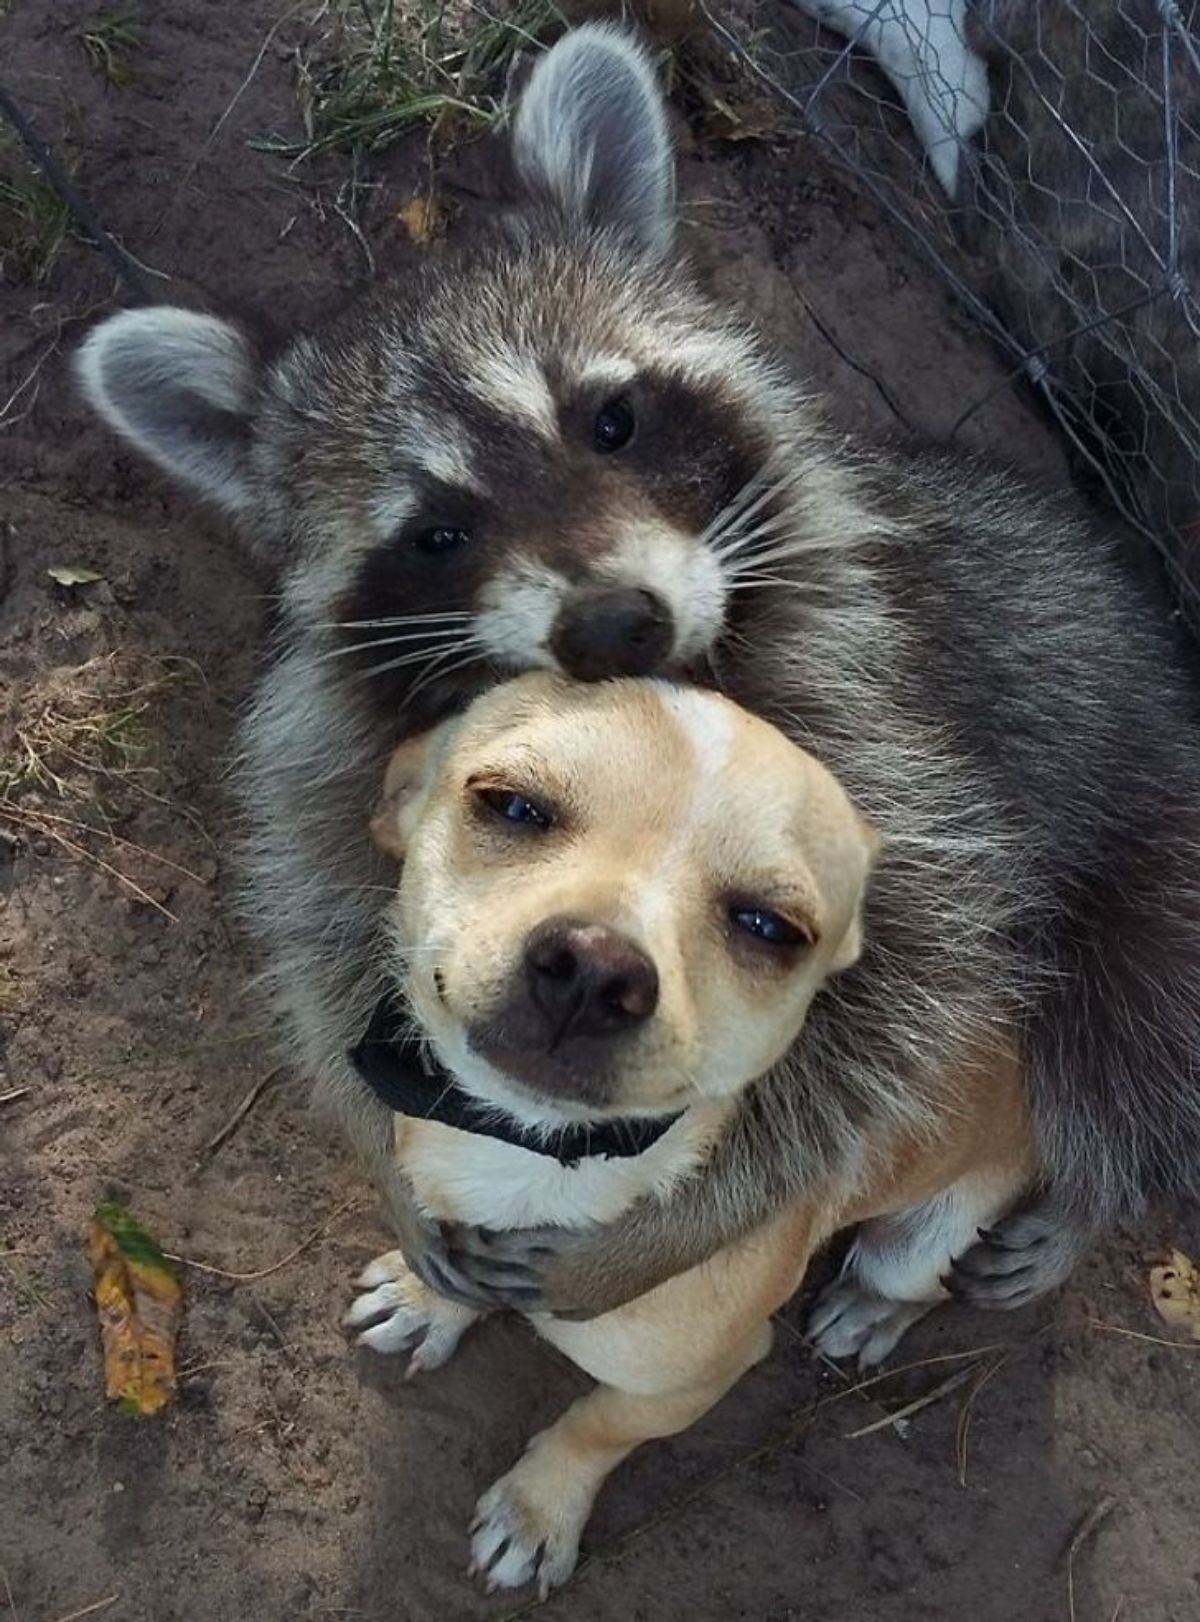 raccoon hugging brown and white dog